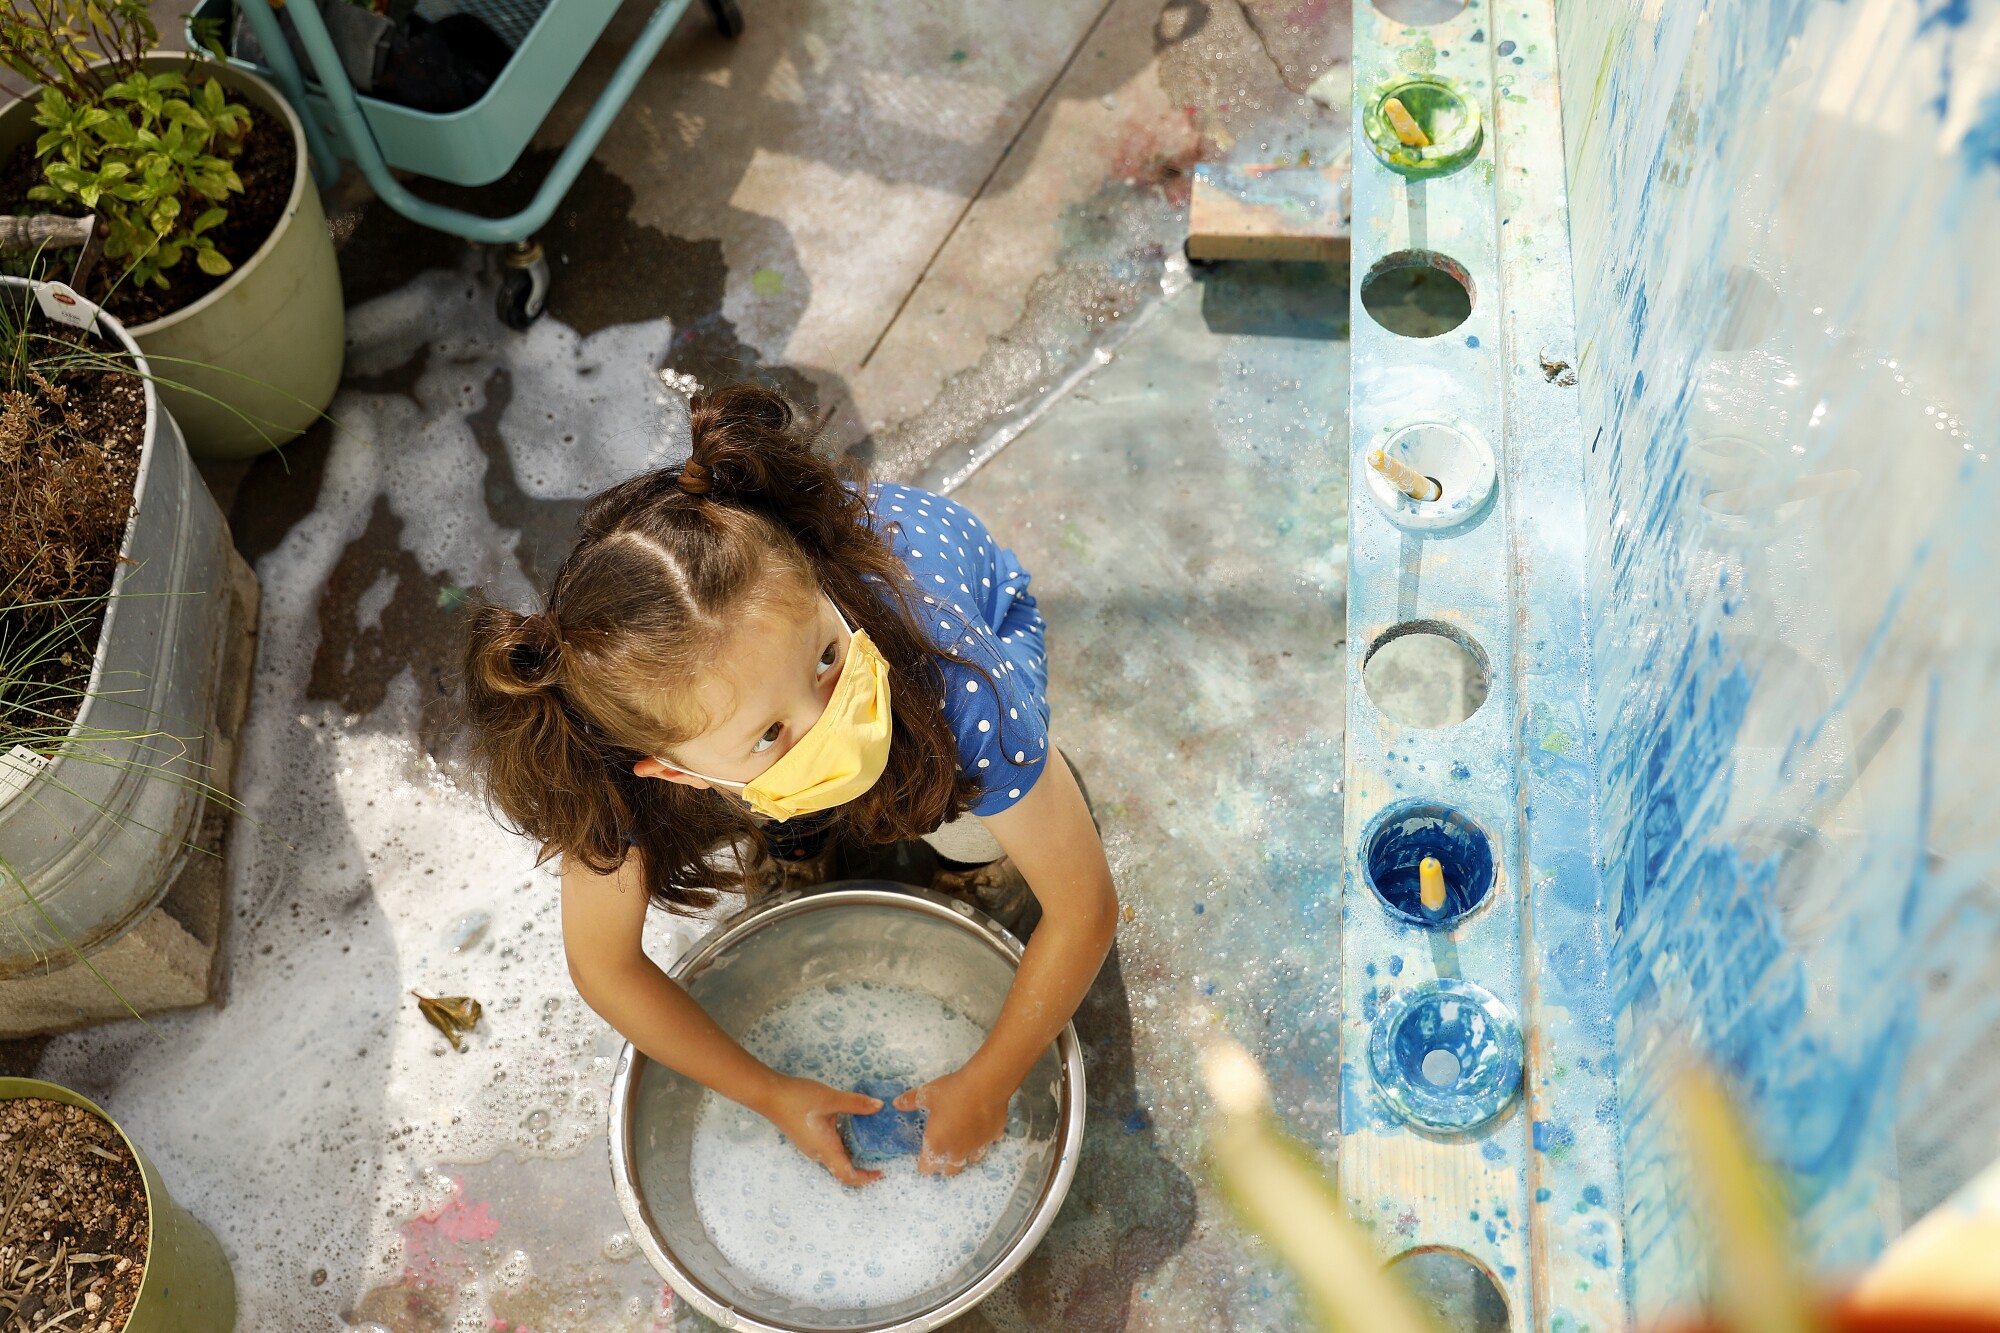 A child wears a mask while painting at Voyages Preschool in Los Angeles.